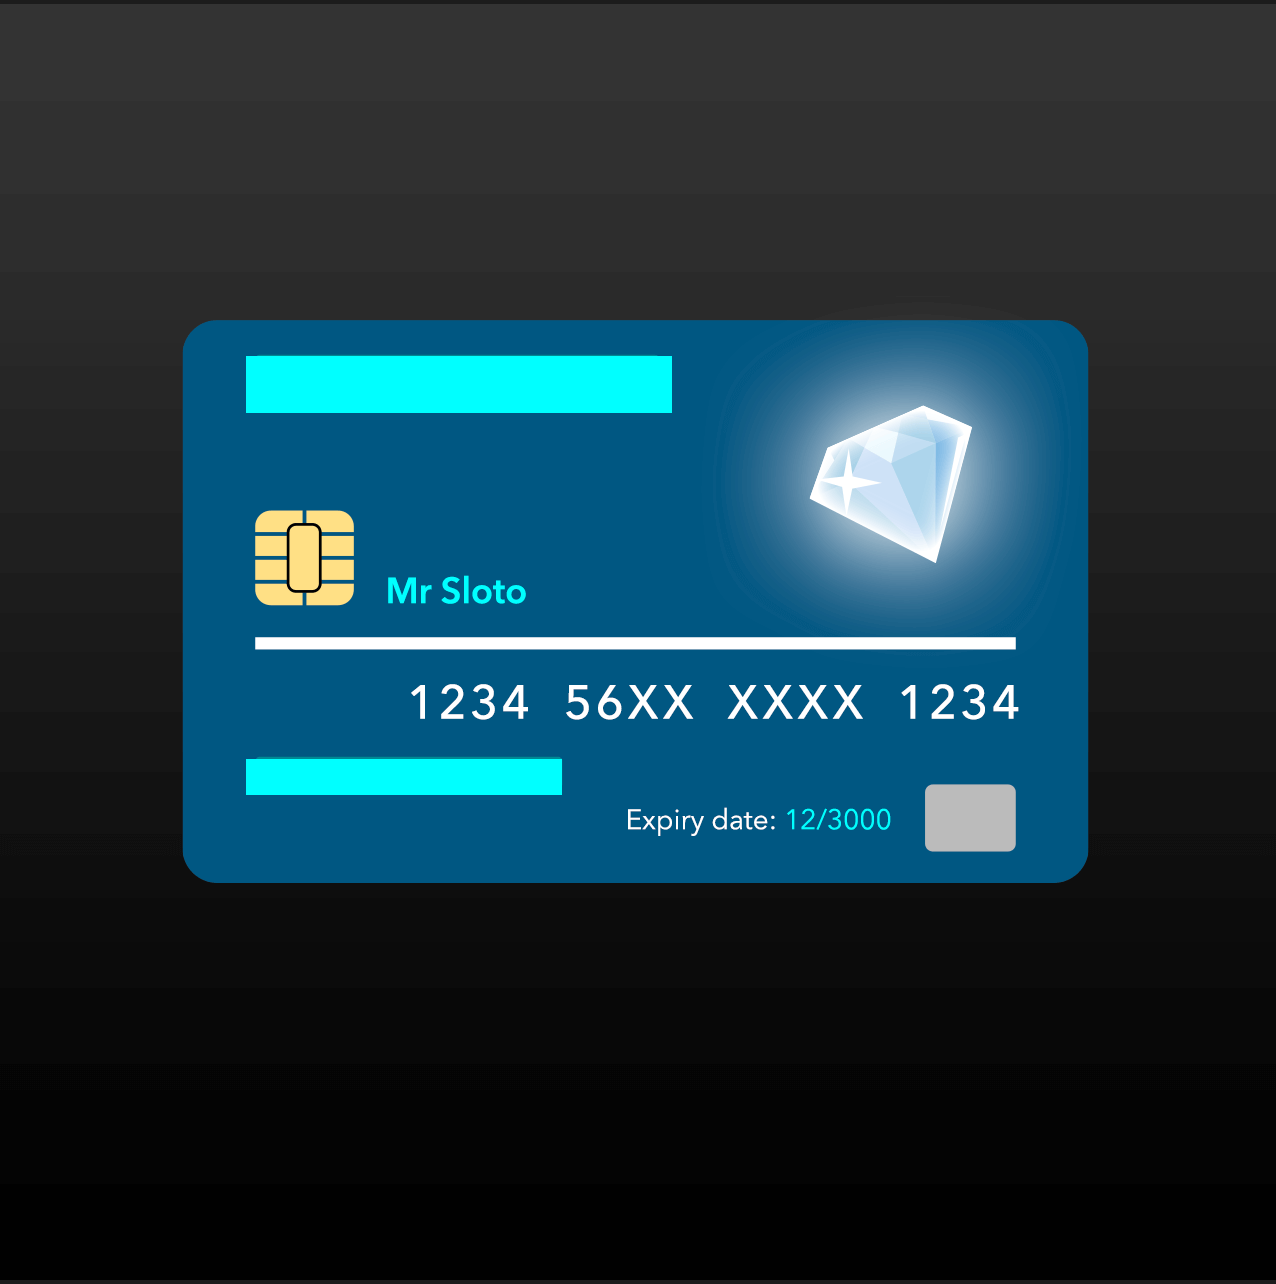 Credit Card Front